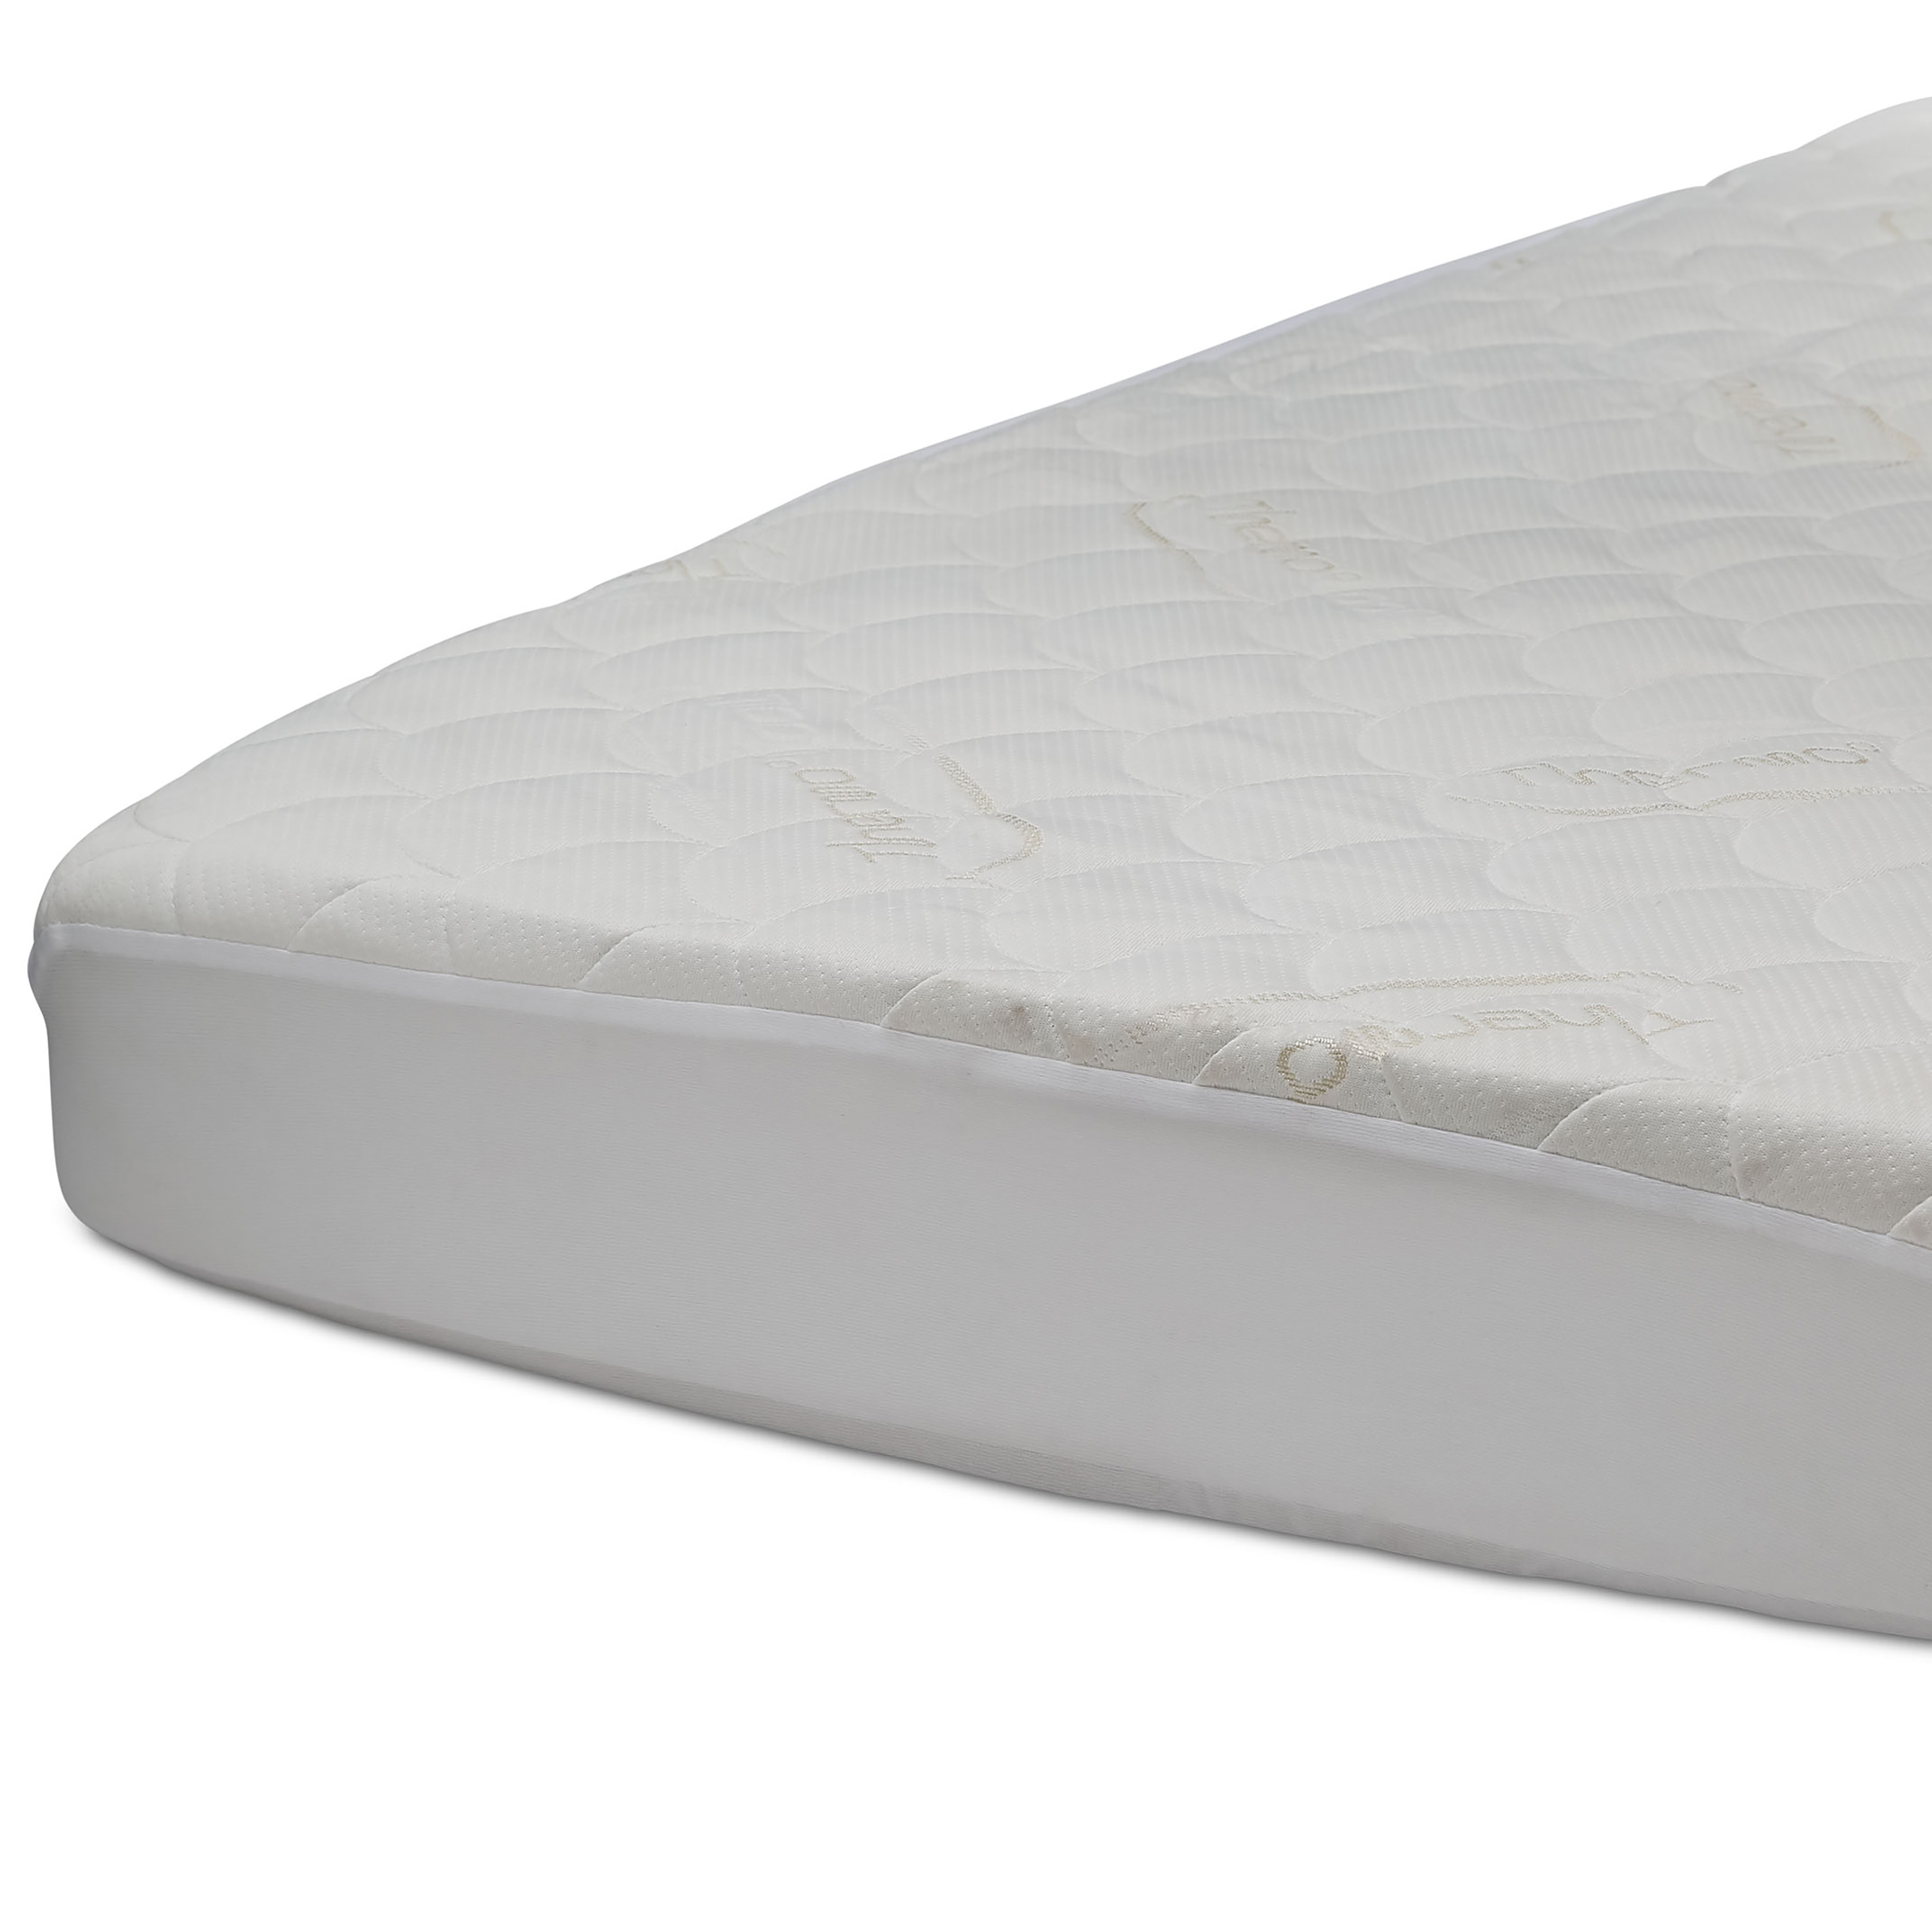 ComforPedic from Beautyrest KIDS Fitted Crib Mattress Protector - image 1 of 4